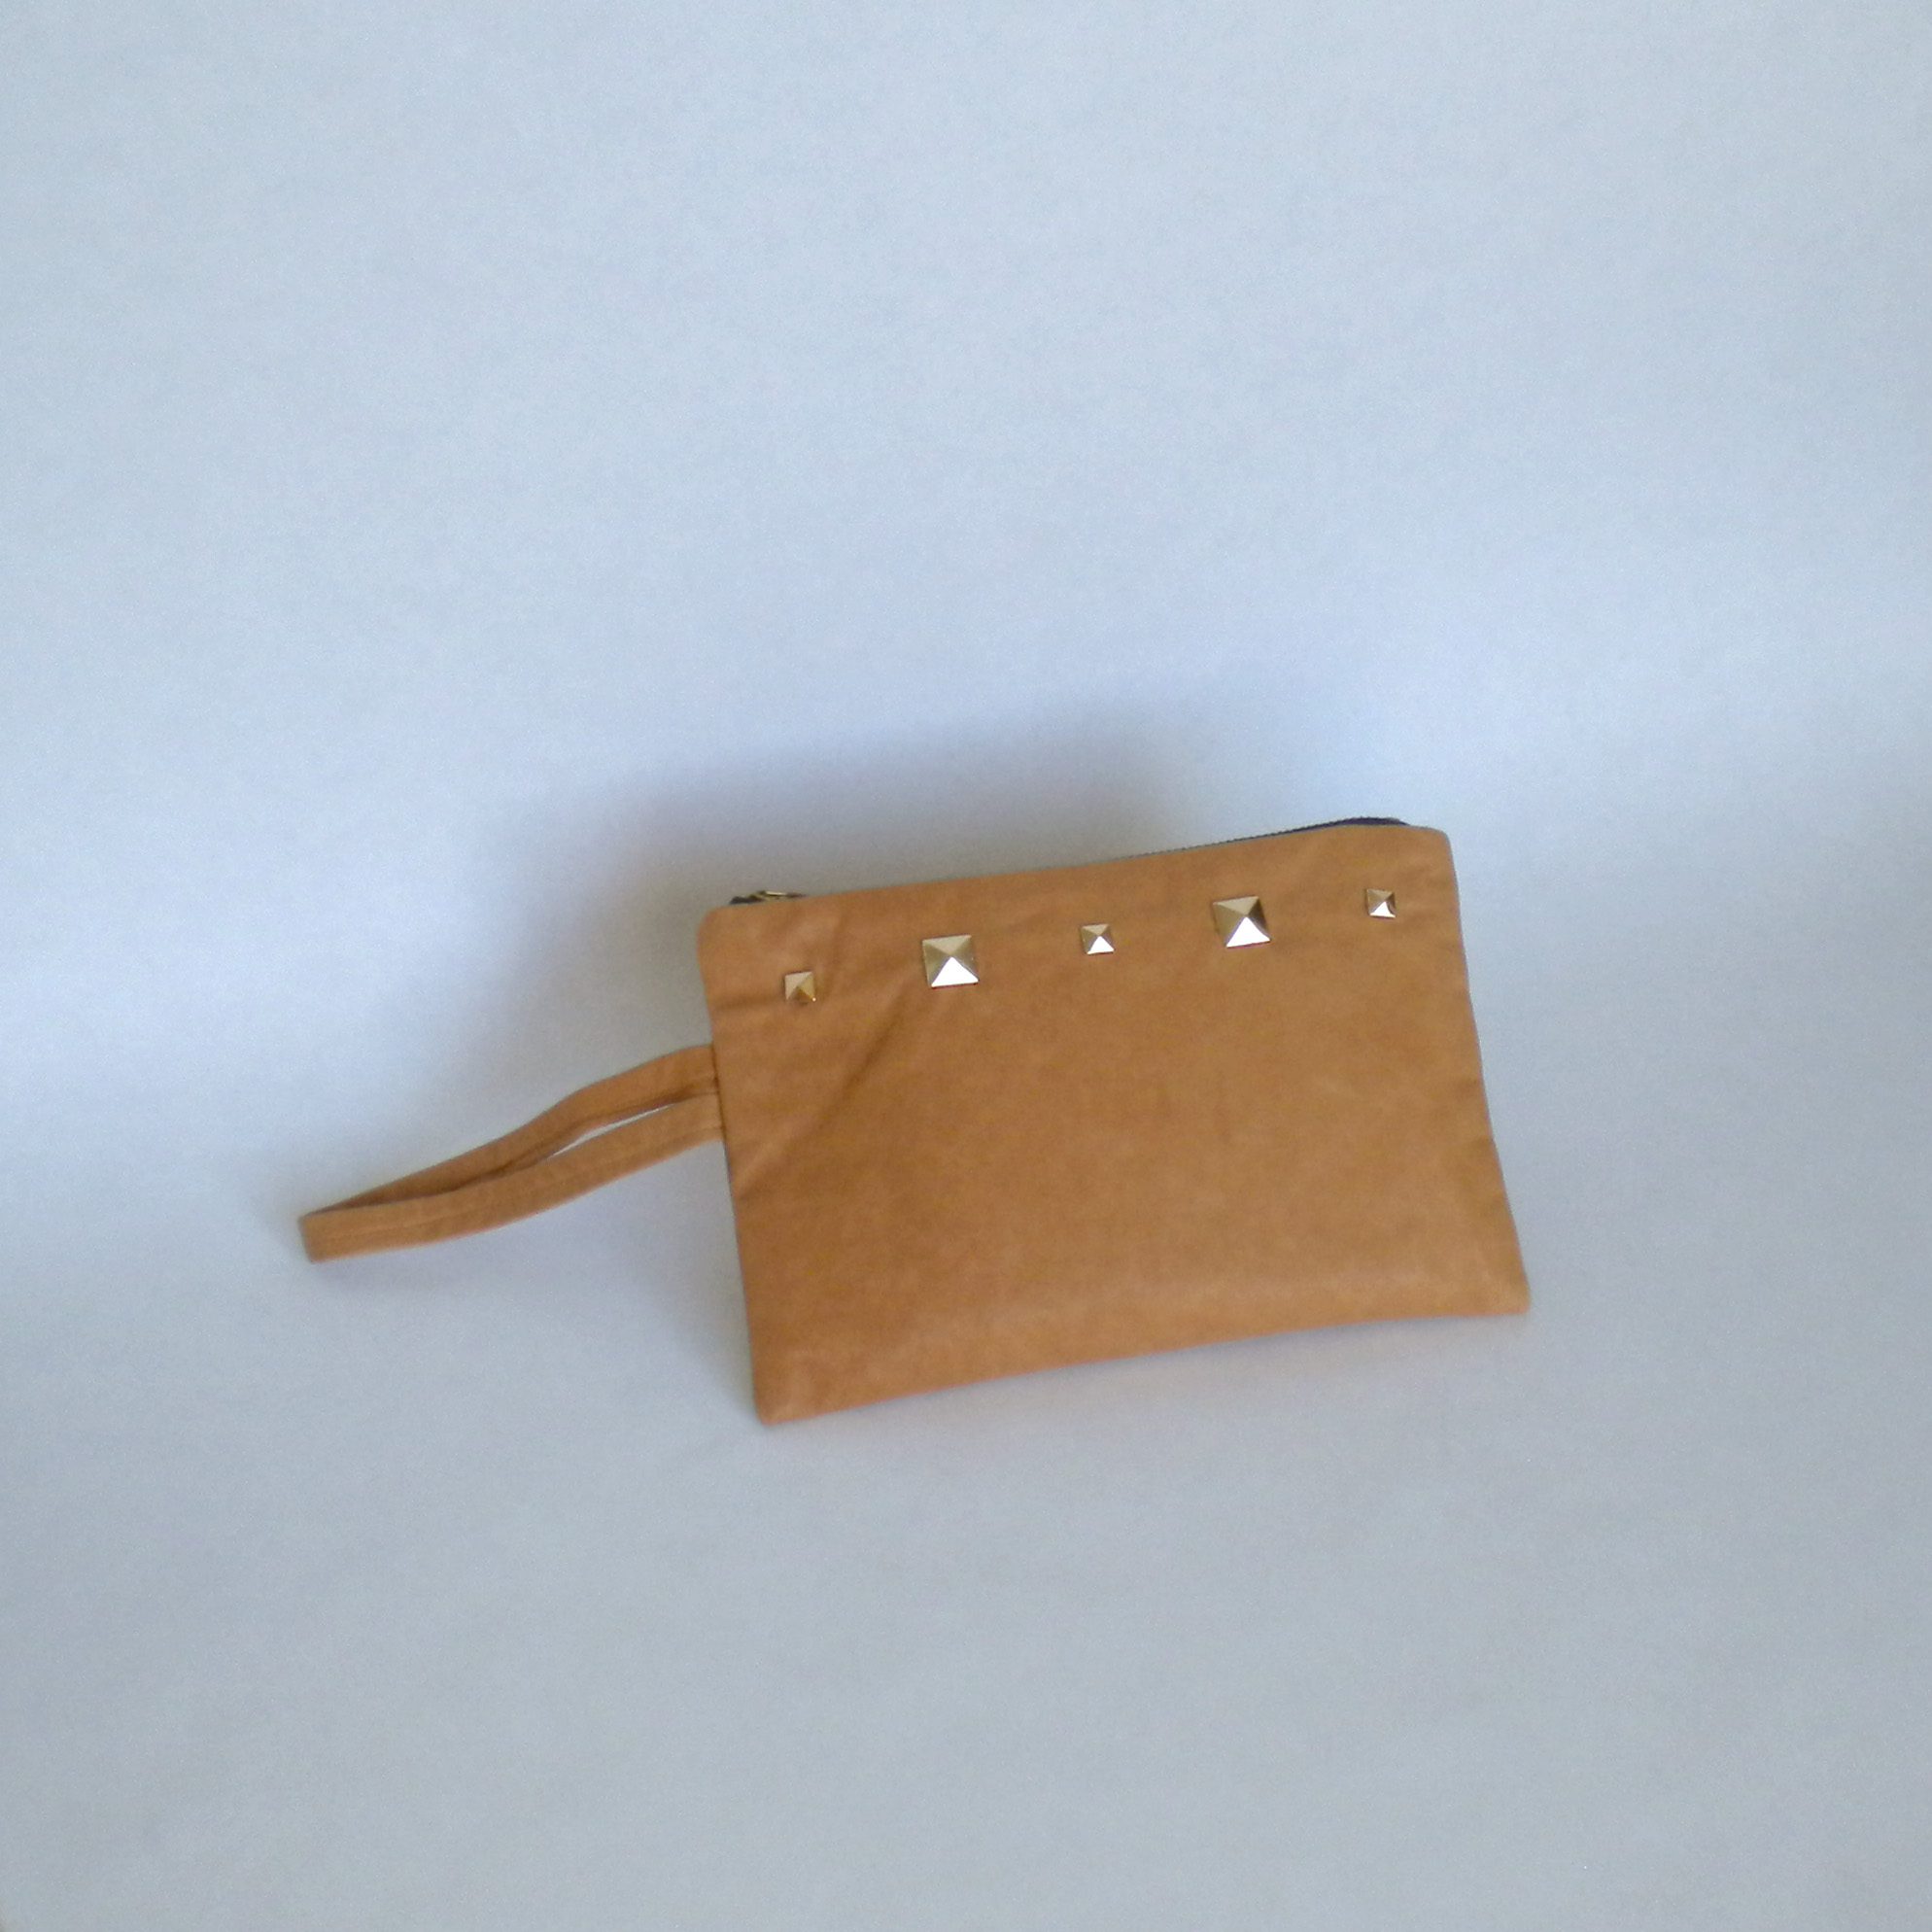  Tan leather clutch with studs 